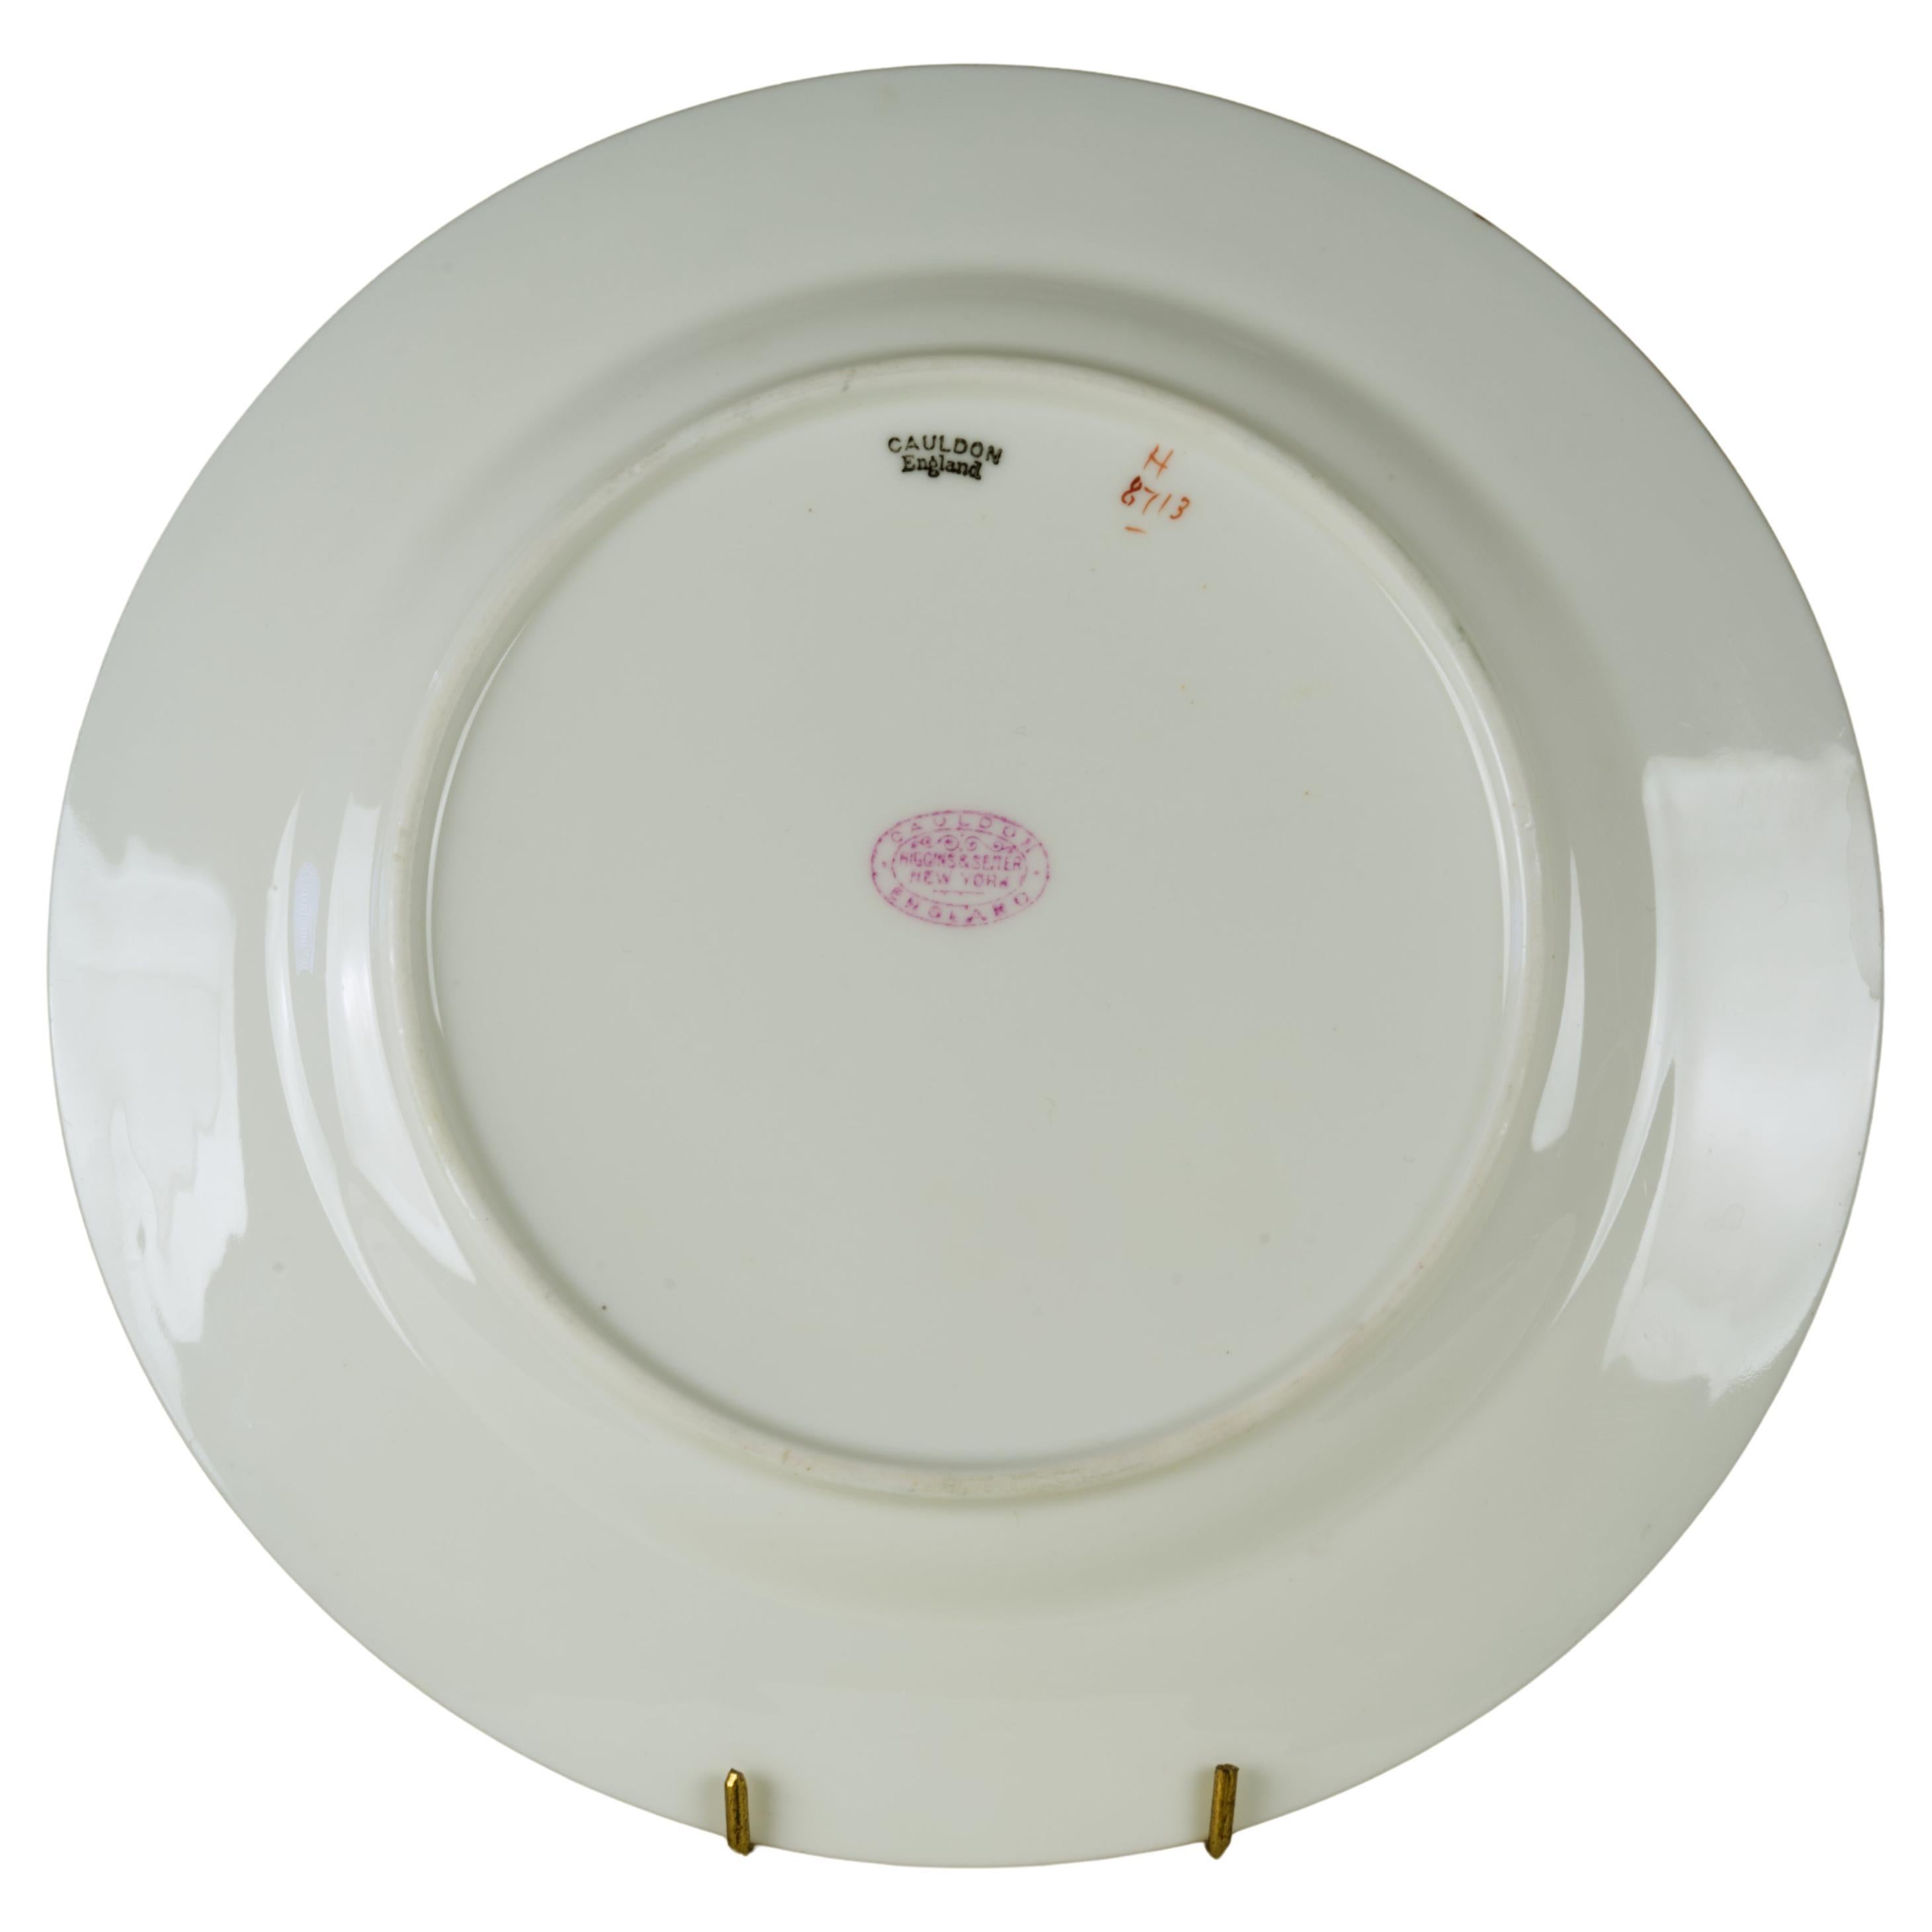 Cauldon set of 6 luncheon plates in H8413 pattern, 1904-1915 For Sale 1